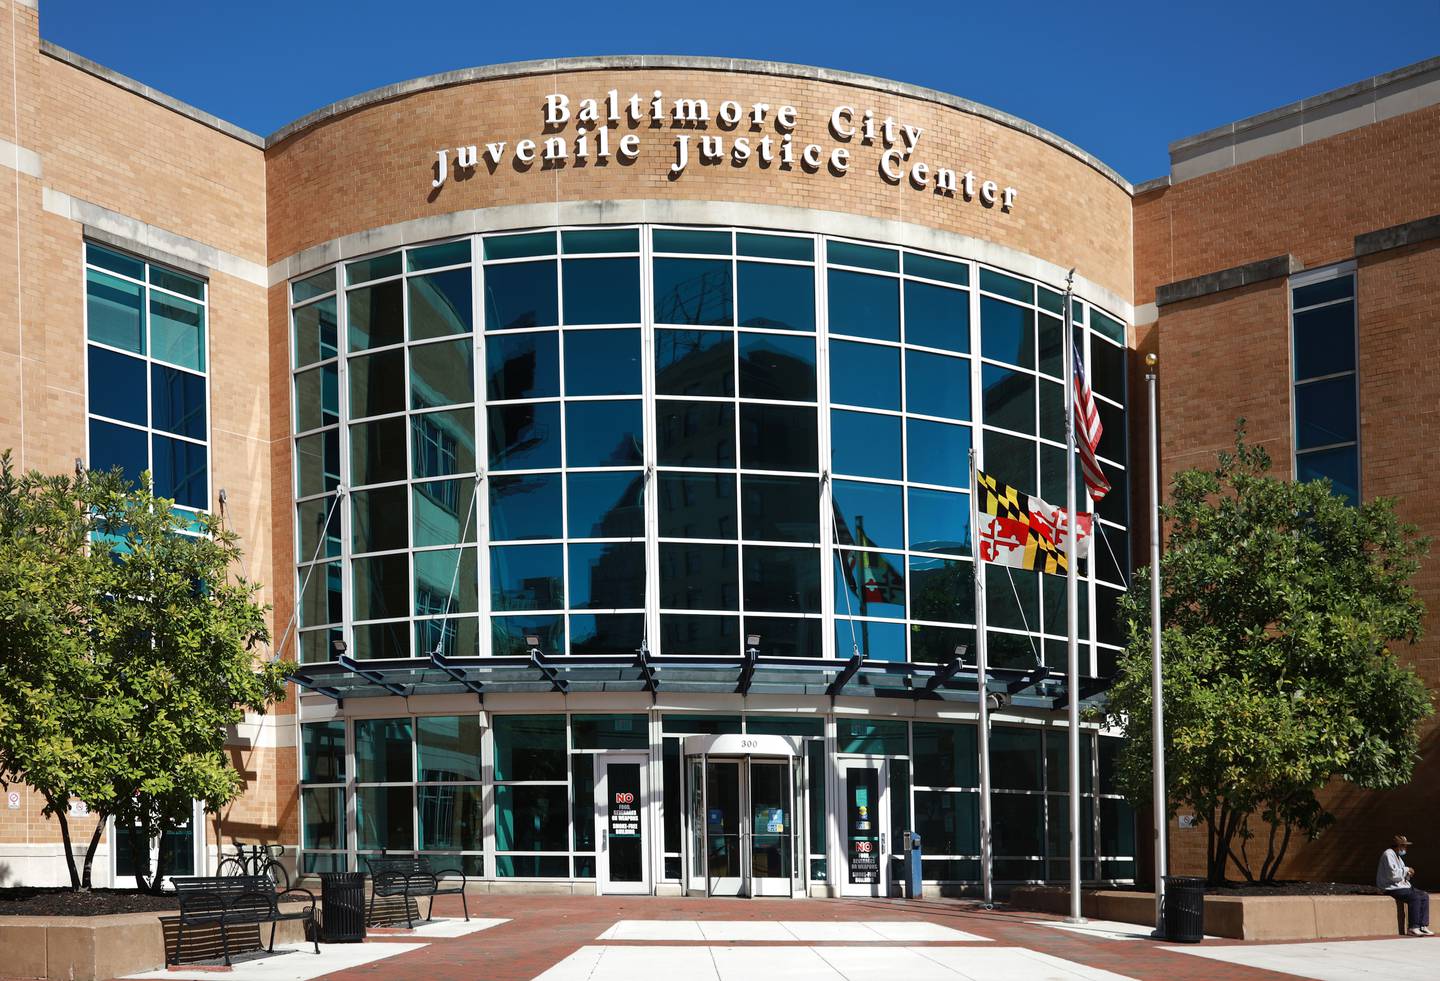 Baltimore Juvenile Justice Center at 300 N. Gay St. opened it’s doors in October 2003